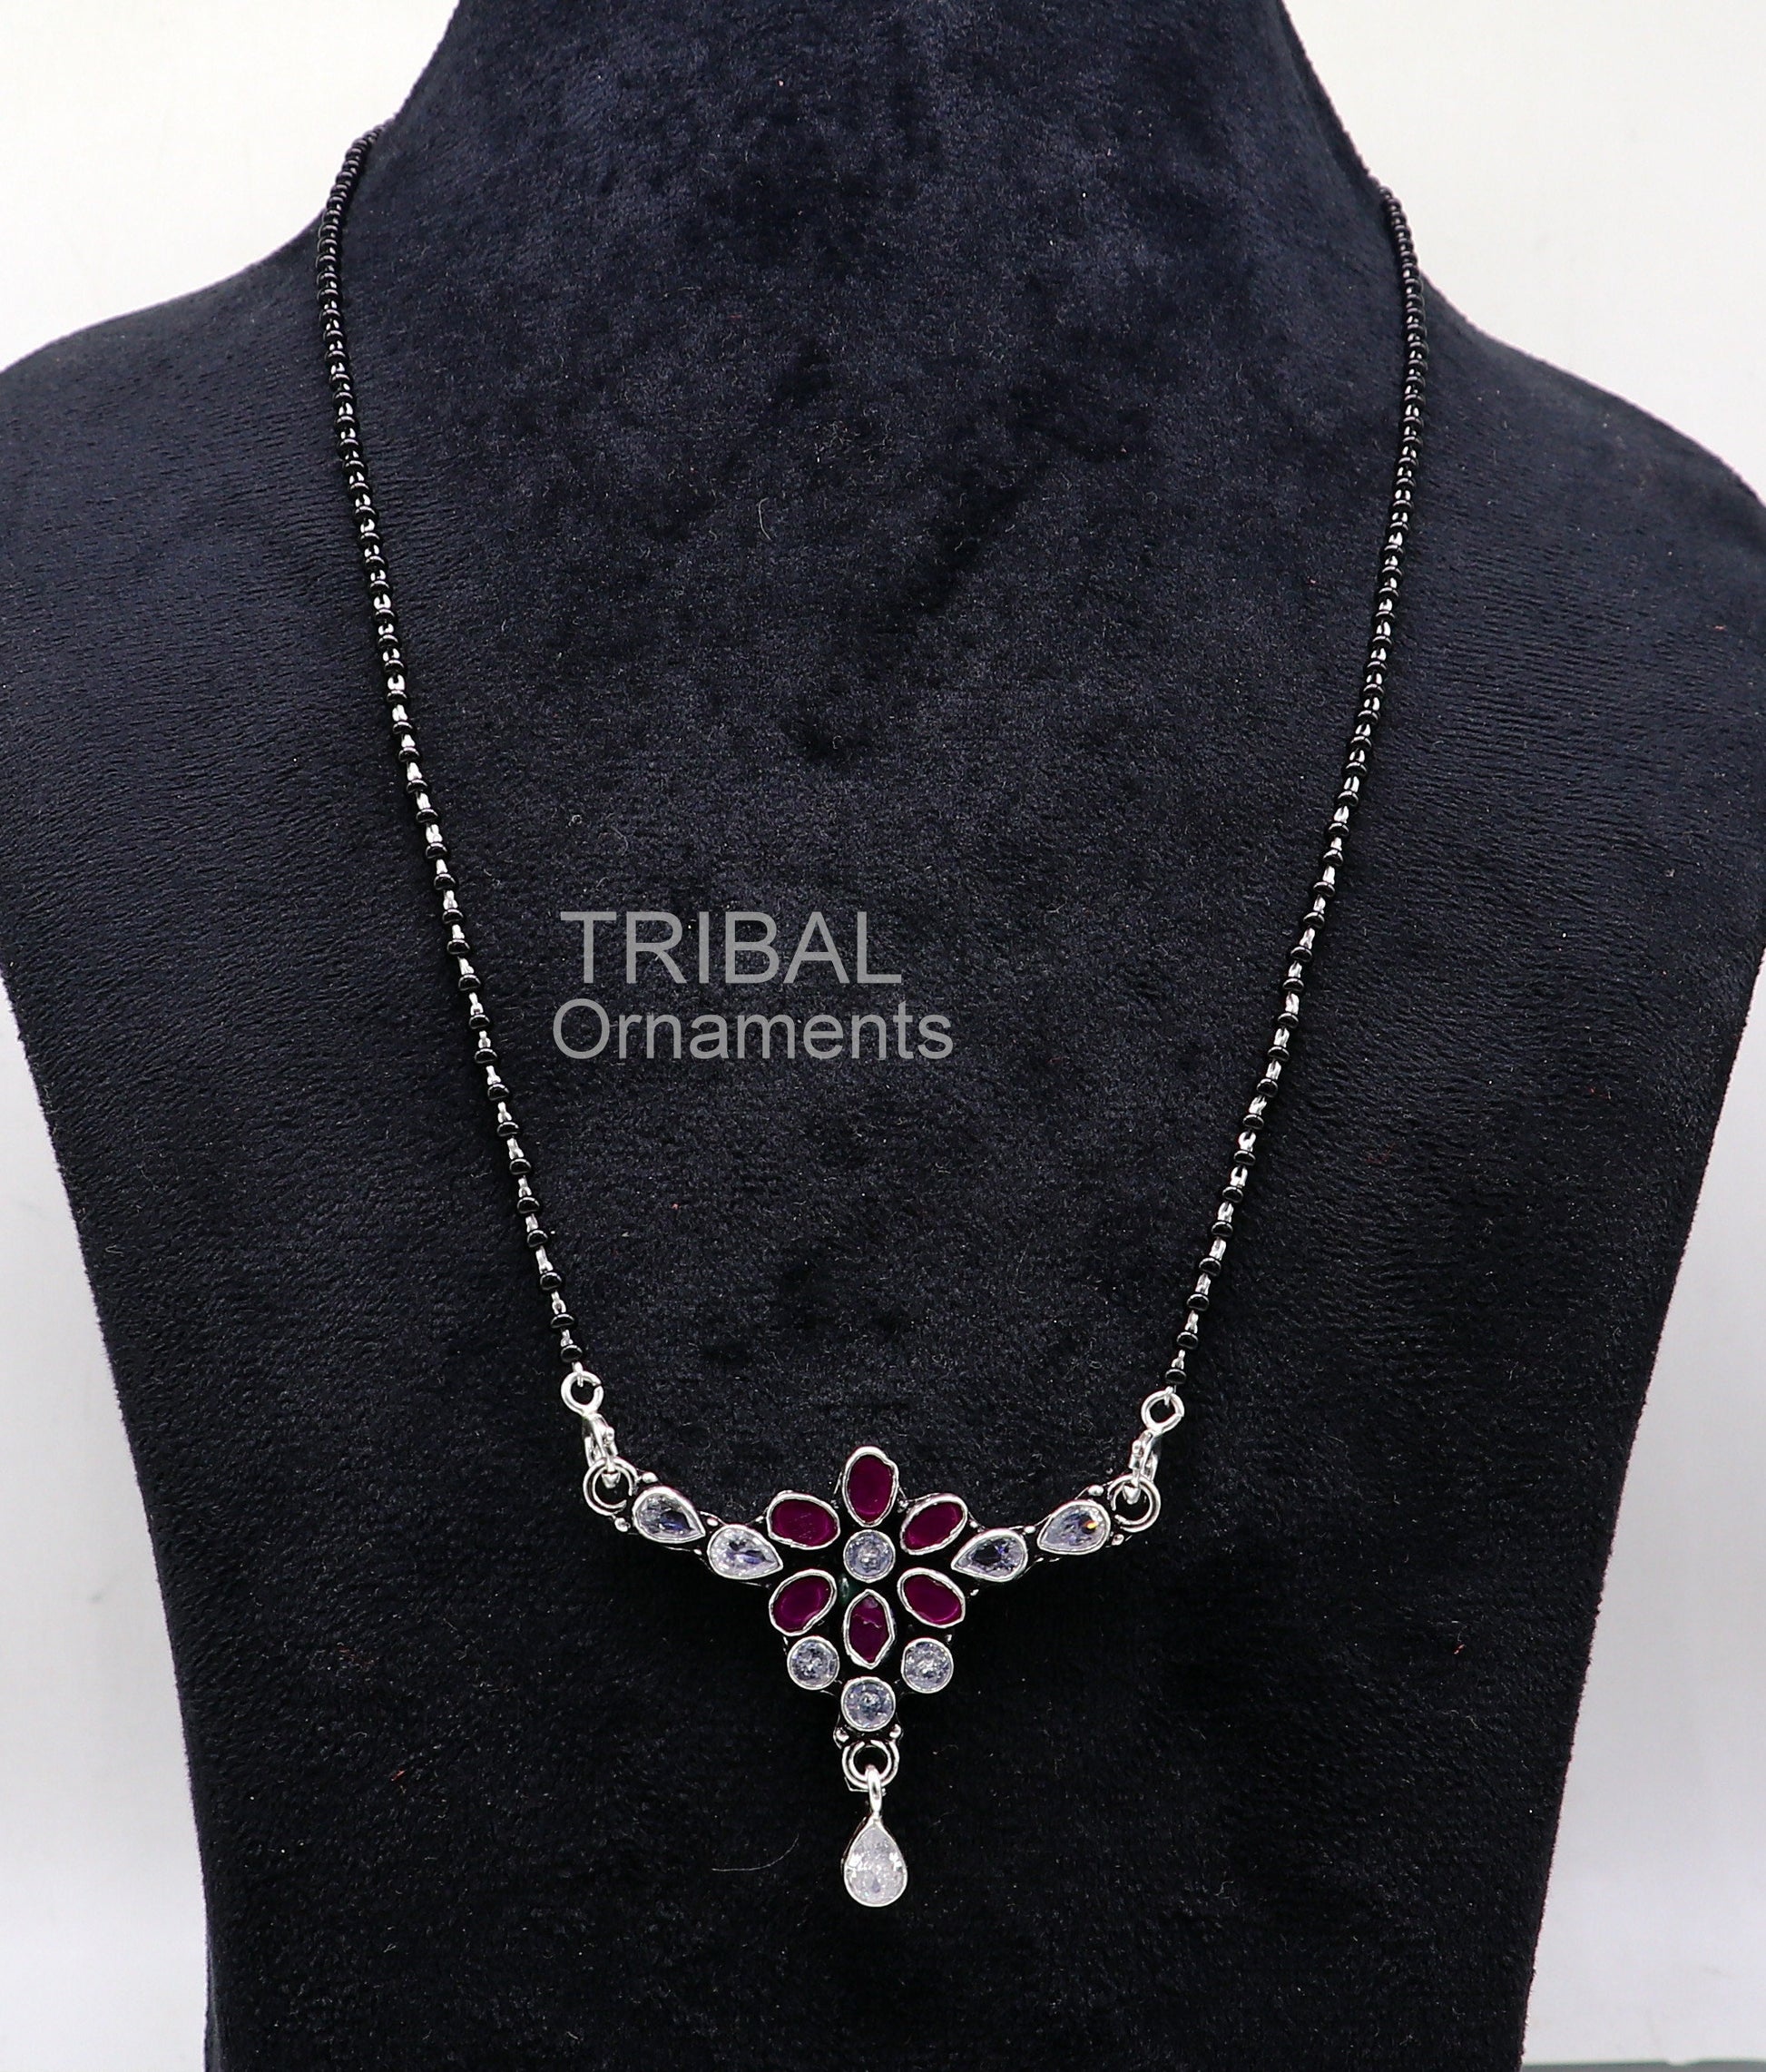 Cultural trendy style 925 sterling silver black beads mangal sutra necklace daily use brides Mangalsutra chunky necklace Mangal Sutra ms28 - TRIBAL ORNAMENTS